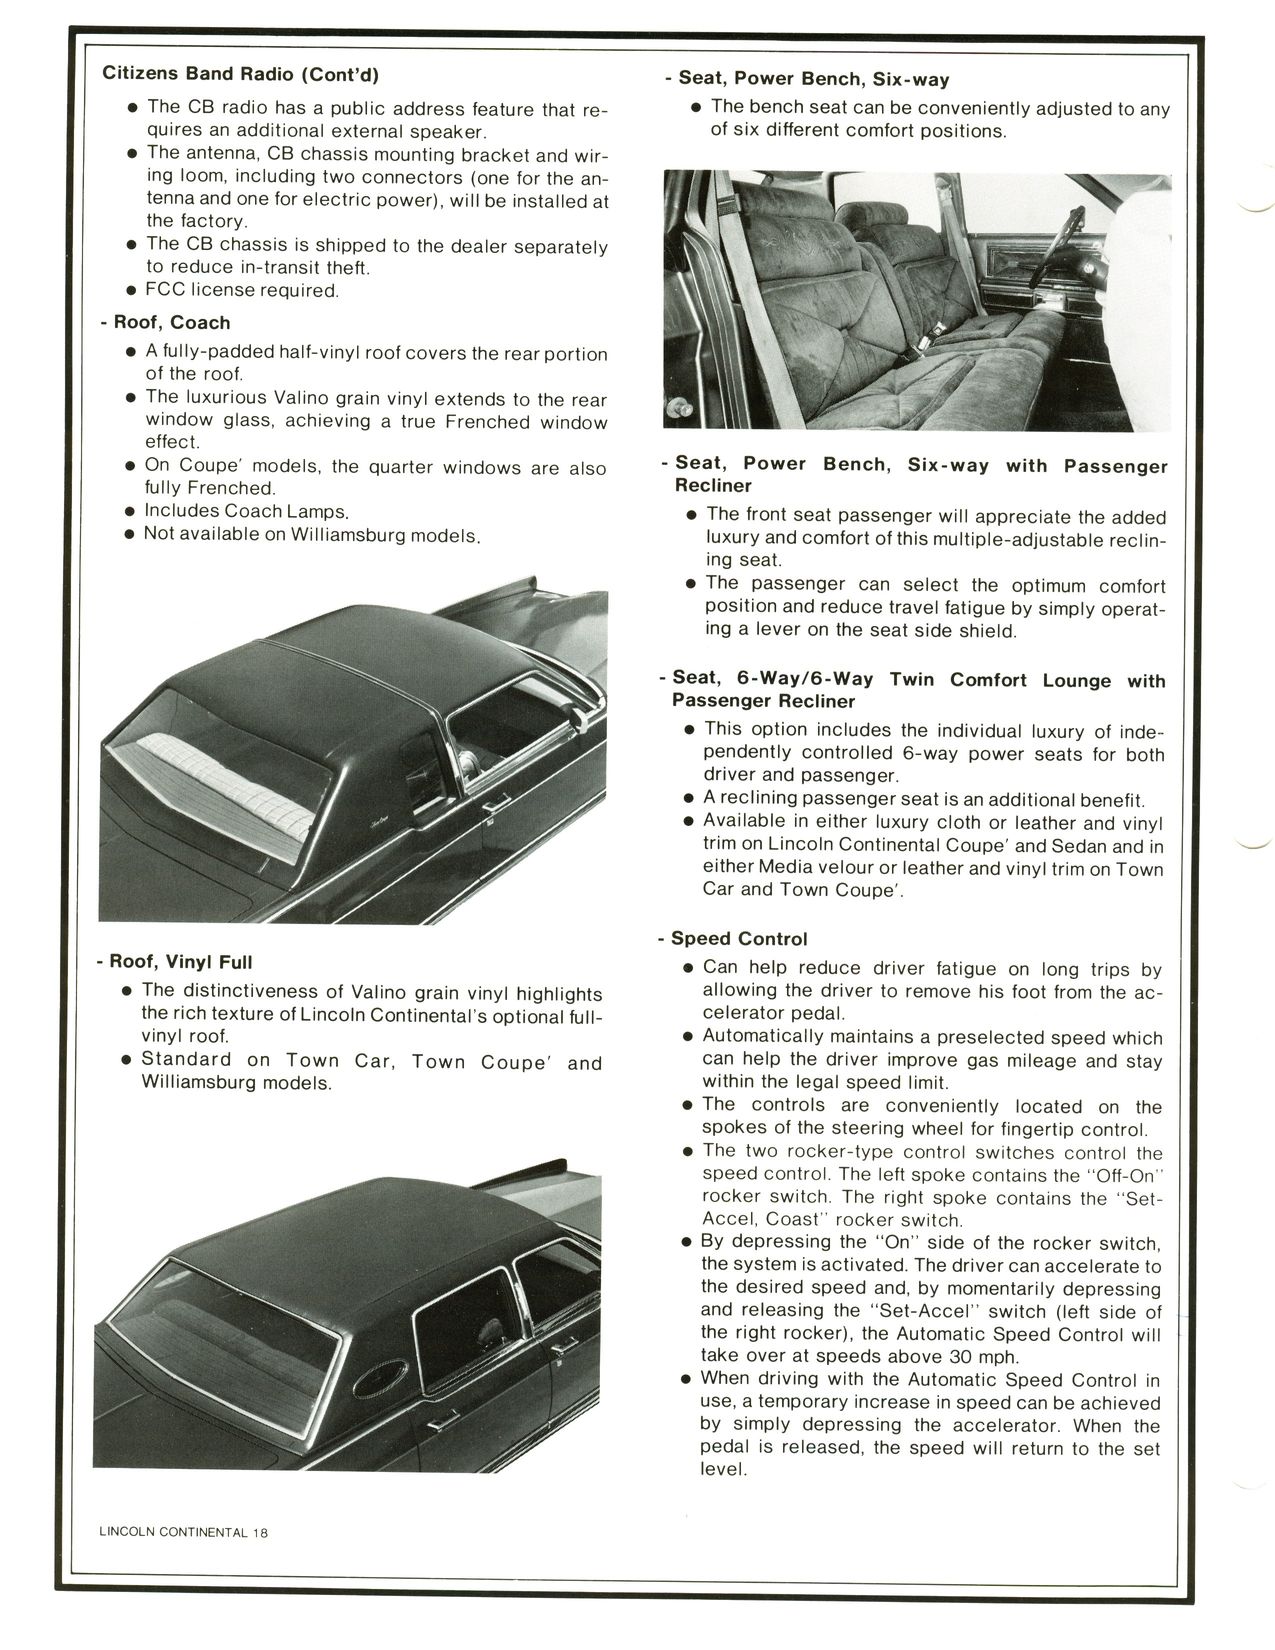 1977 Continental Product Facts Book-2-18